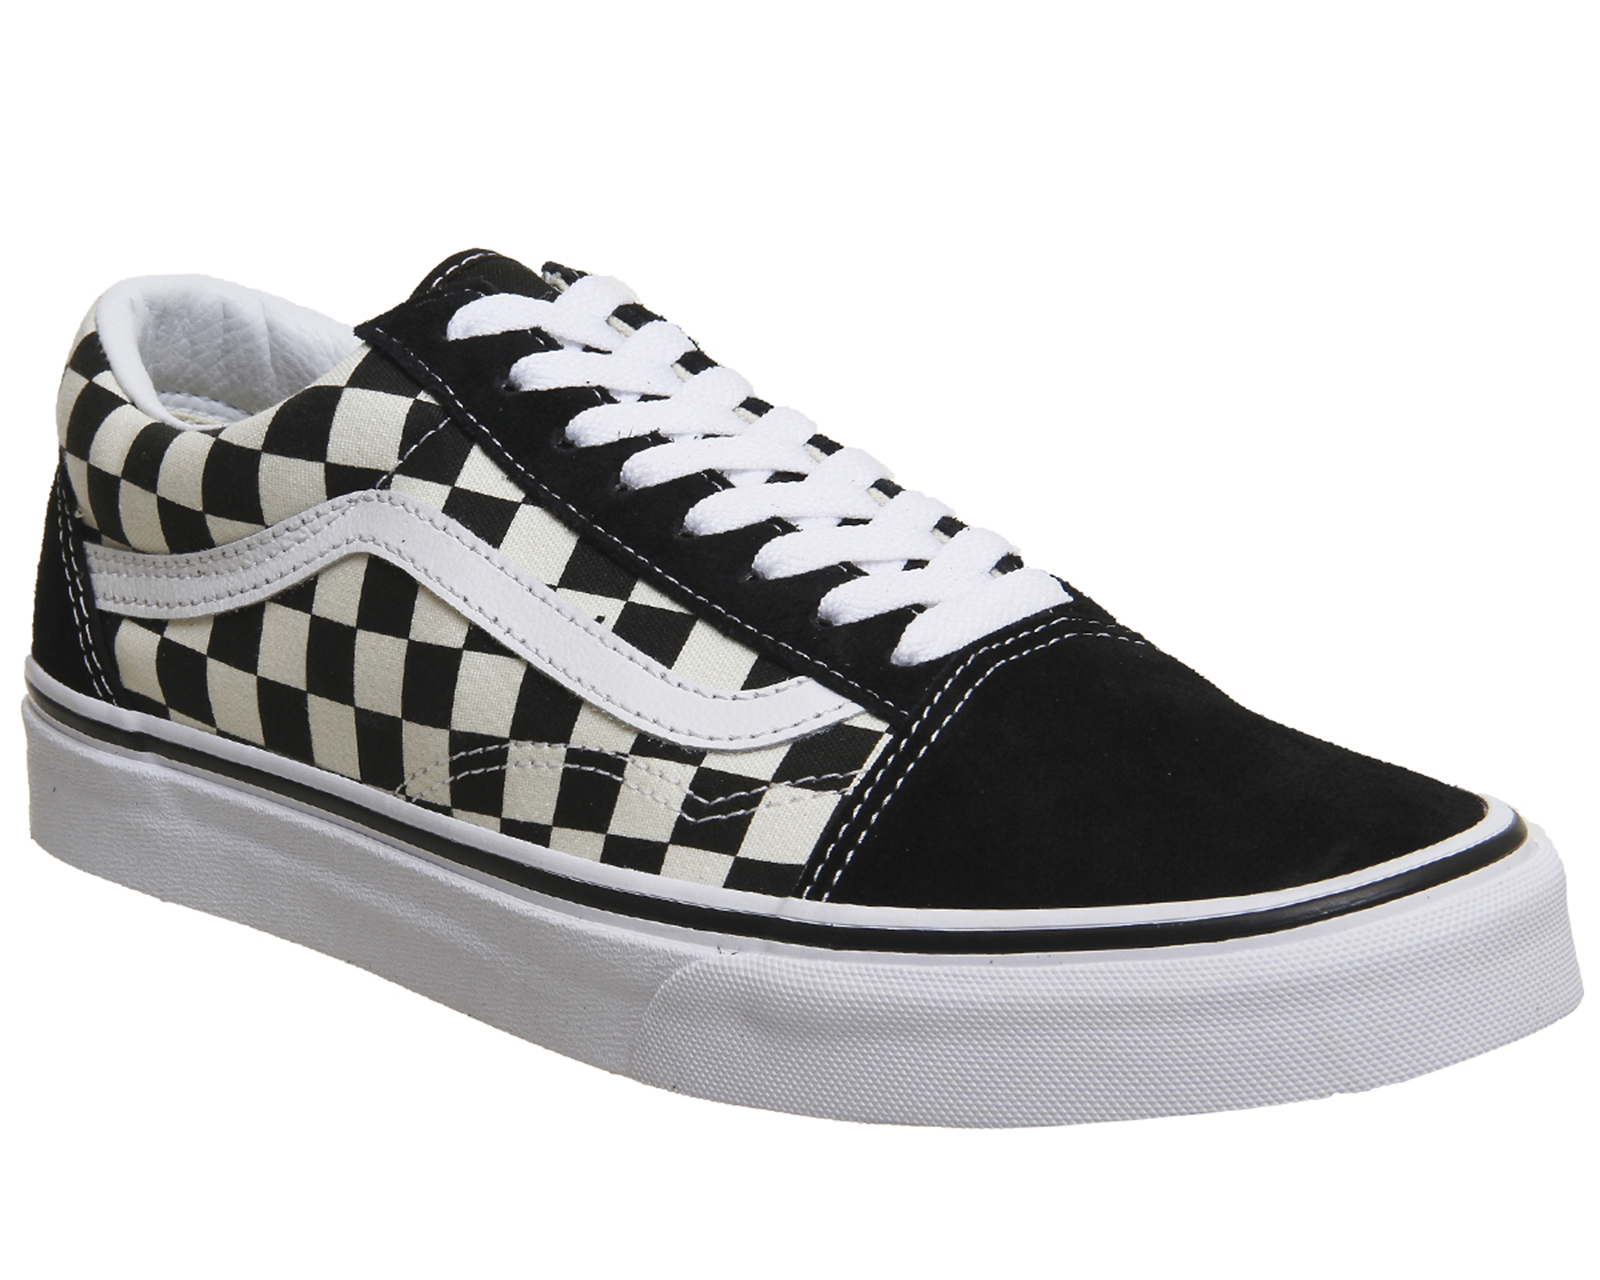 checkerboard vans laces womens